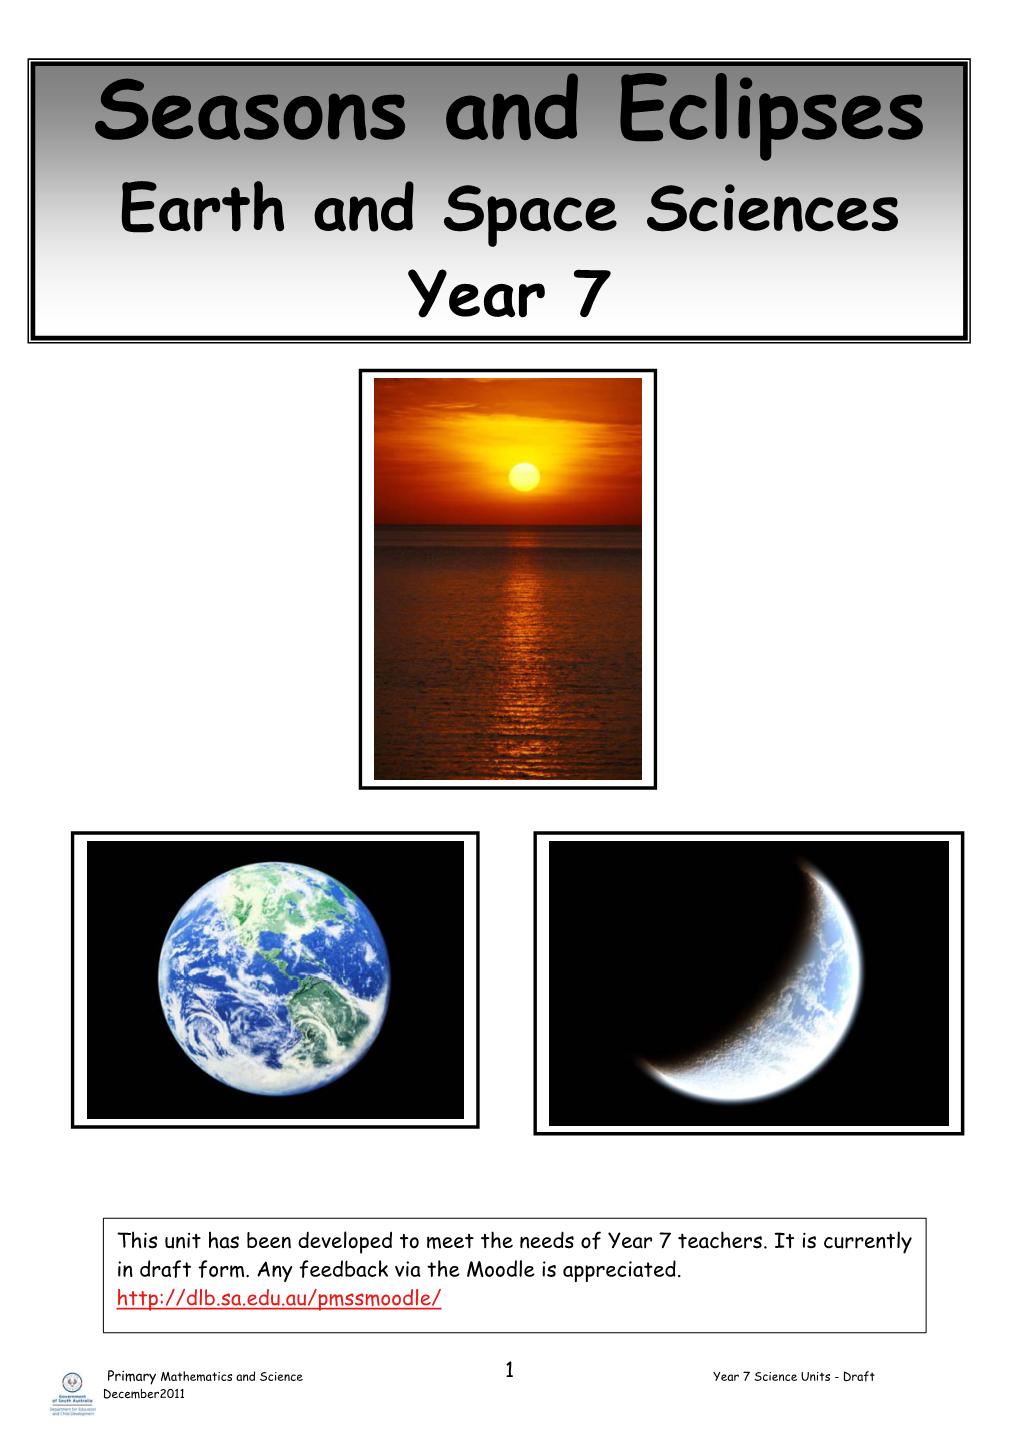 Seasons and Eclipses Earth and Space Sciences Year 7